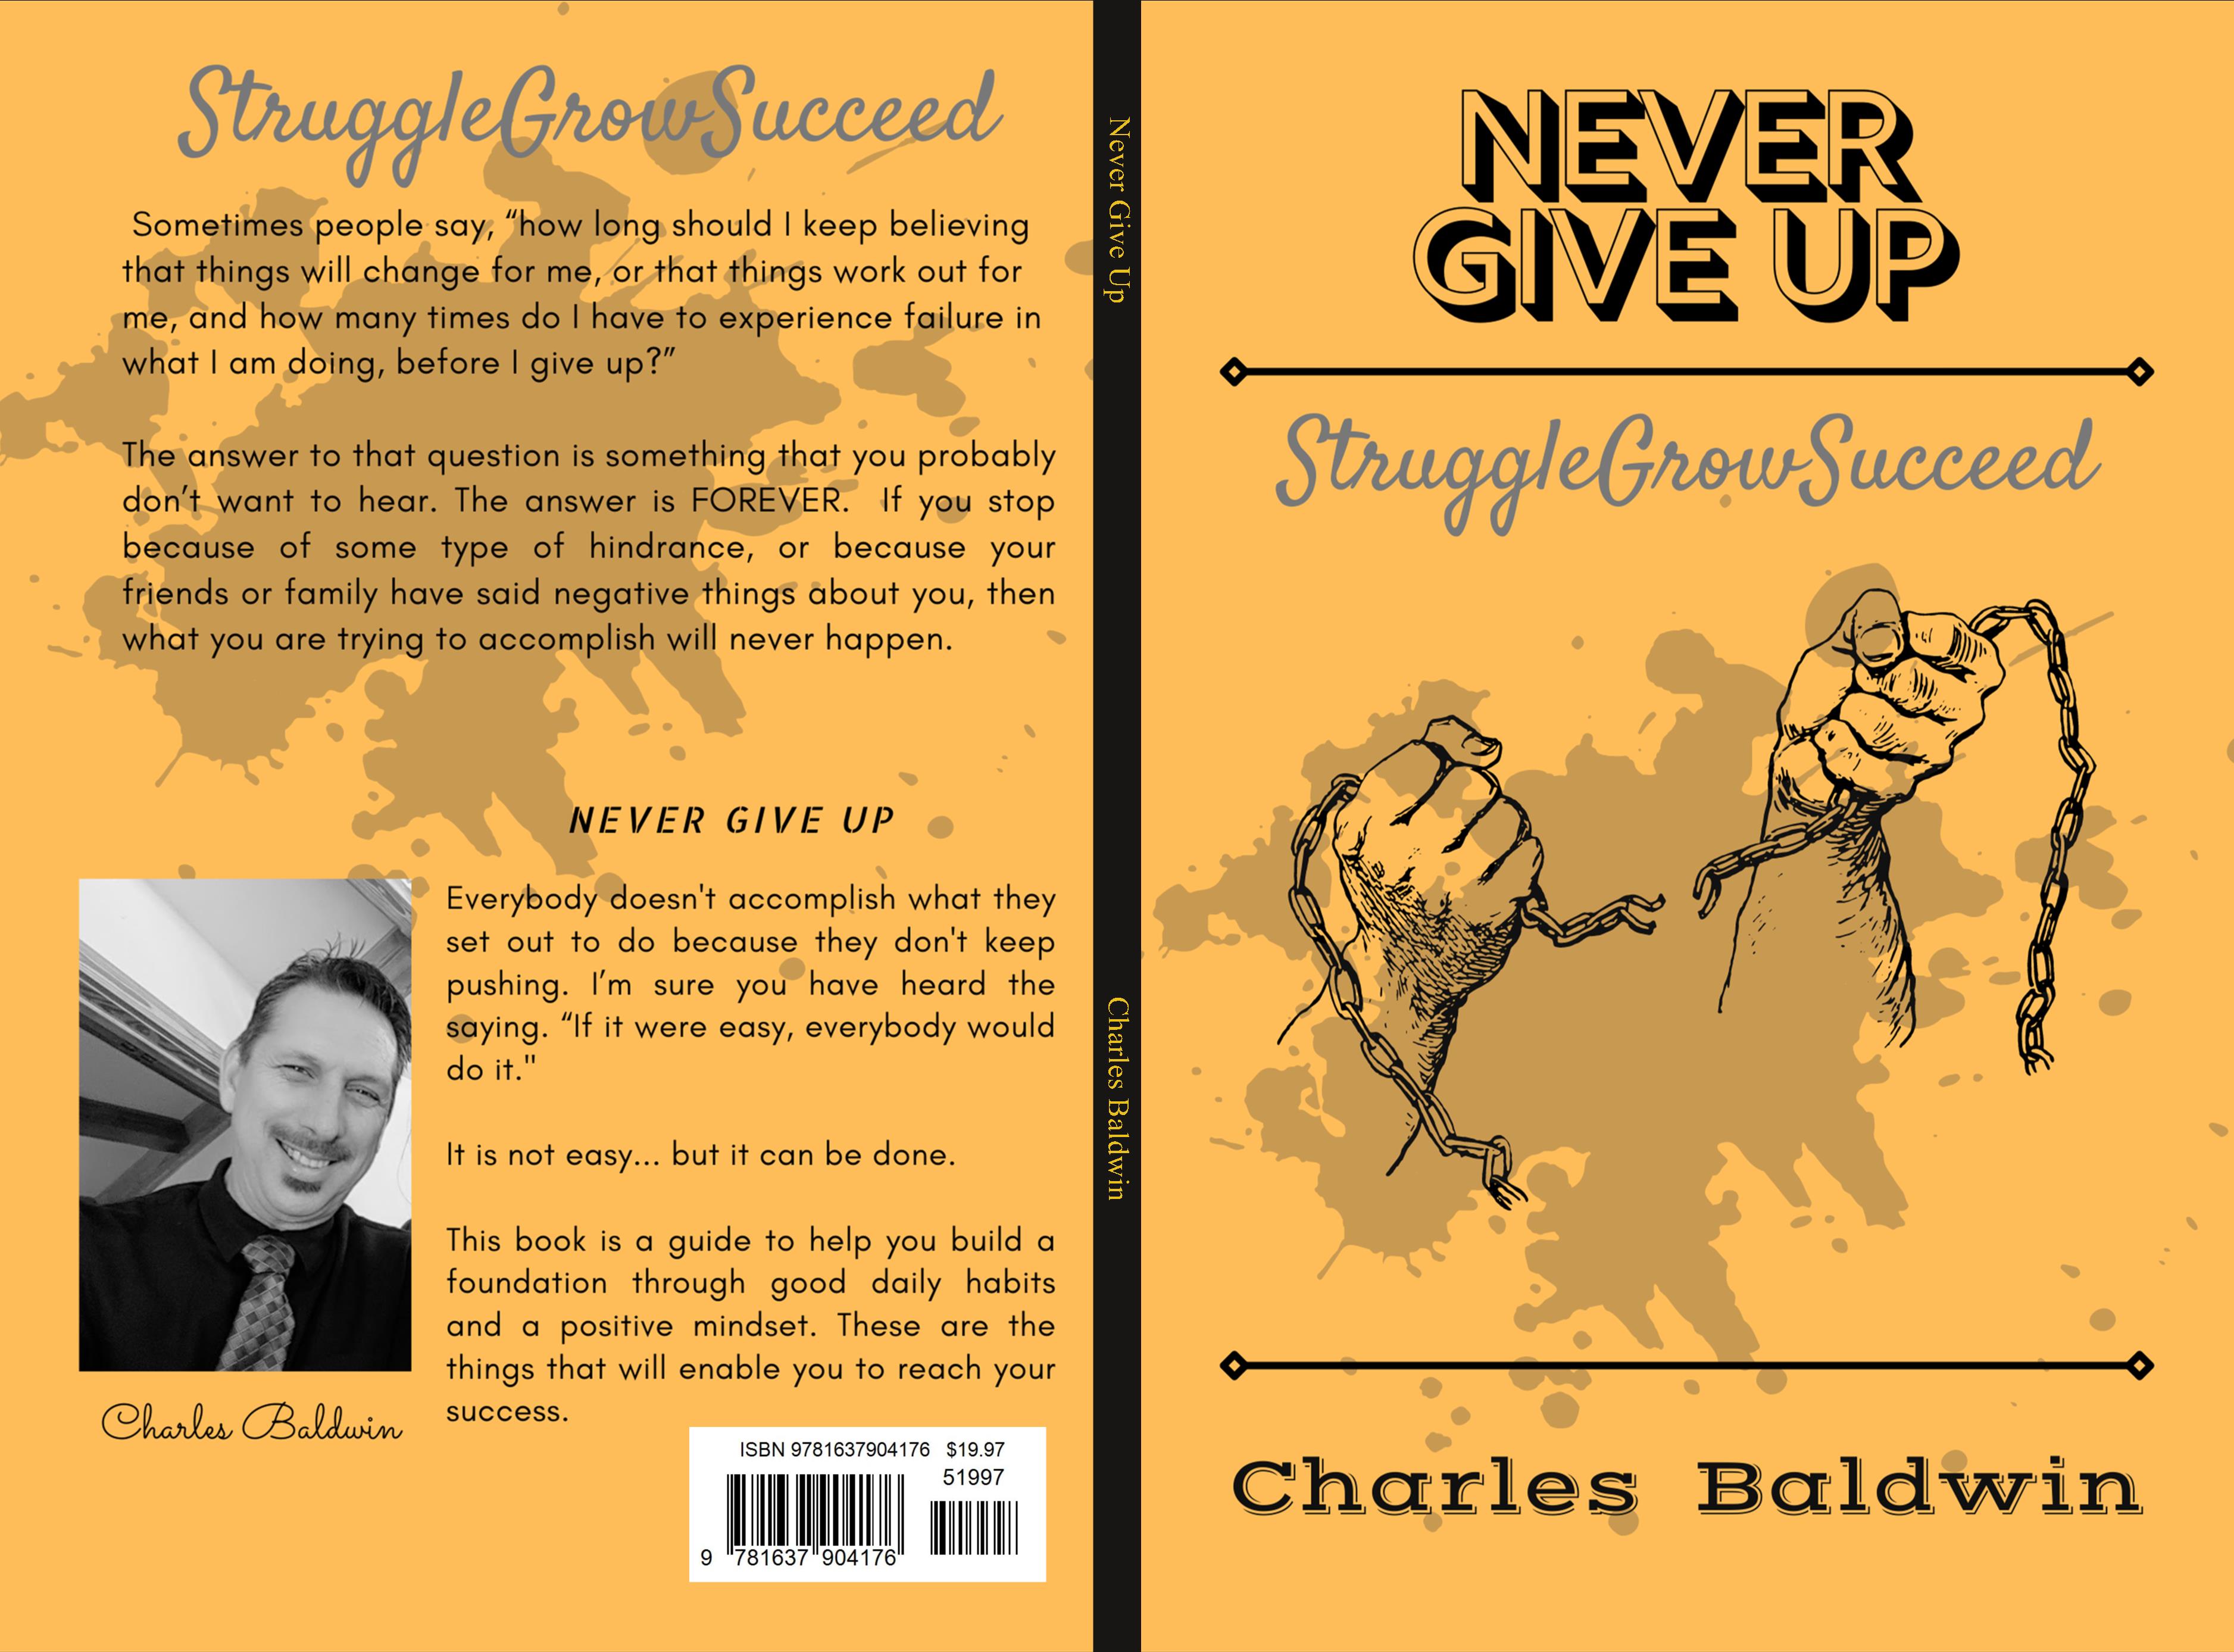 Never Give Up cover image